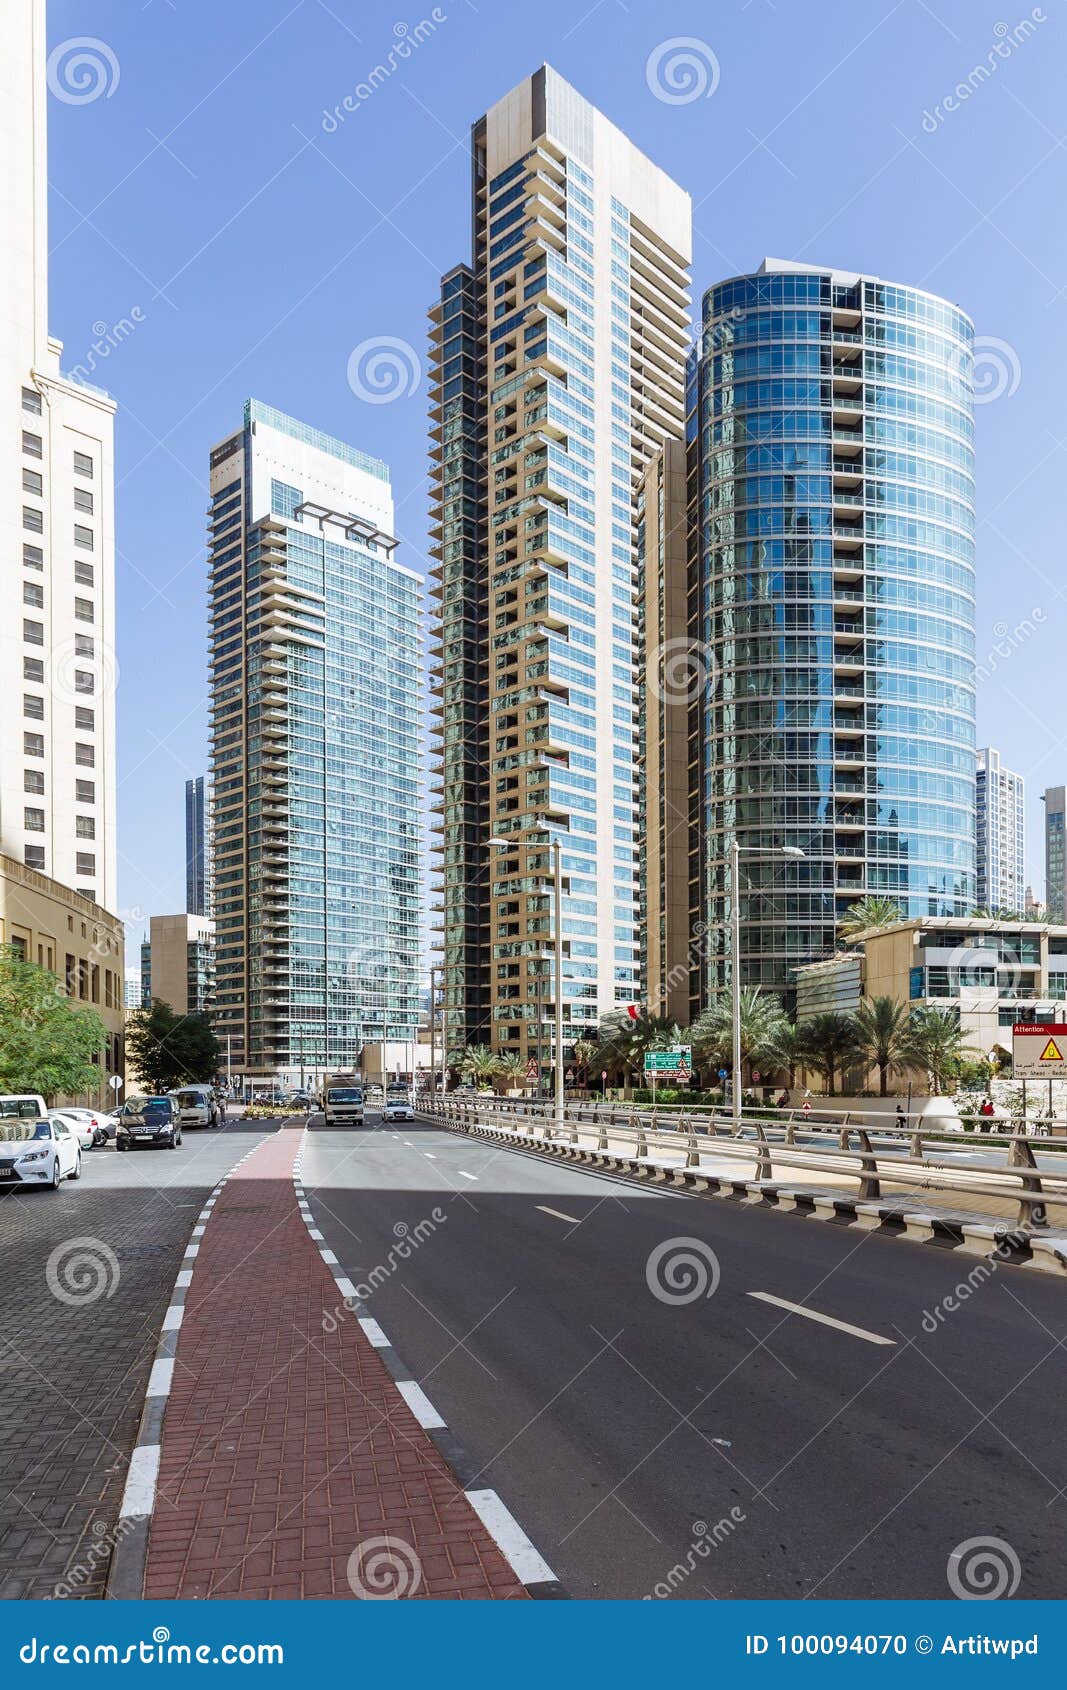 City Scape with Modern High-rise Buildings, Road and Blue Sky in Background  at Dubai Editorial Image - Image of asia, arabic: 100094070